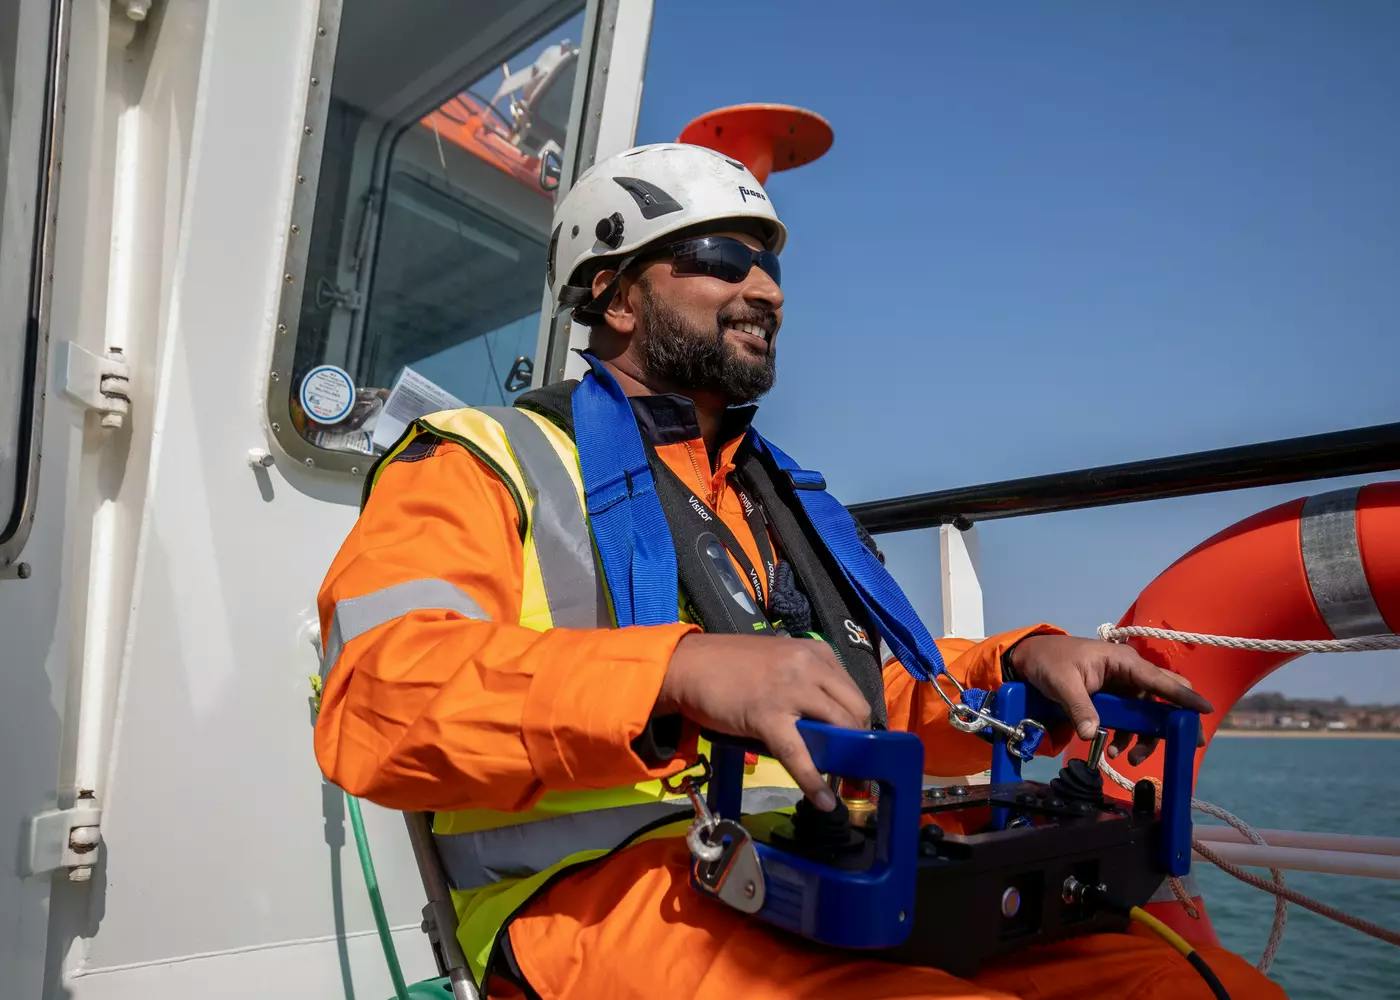 Fugro staff member Rahul Pakkath remotely pilots the vessel on a course for the remote USV whilst taking part in a practical training session in the operation of uncrewed surface vessels (USVs) on board the WillChallenge on Southampton Water. 
-
Fugro Middle East personnel have completed the world's first Maritime Autonomous Surface Systems (MASS) professional certified training delivered by SeaBot XR at their training academy CEbotiX, the National Centre for Operational Excellence in Marine Robotics based in Southampton, UK.